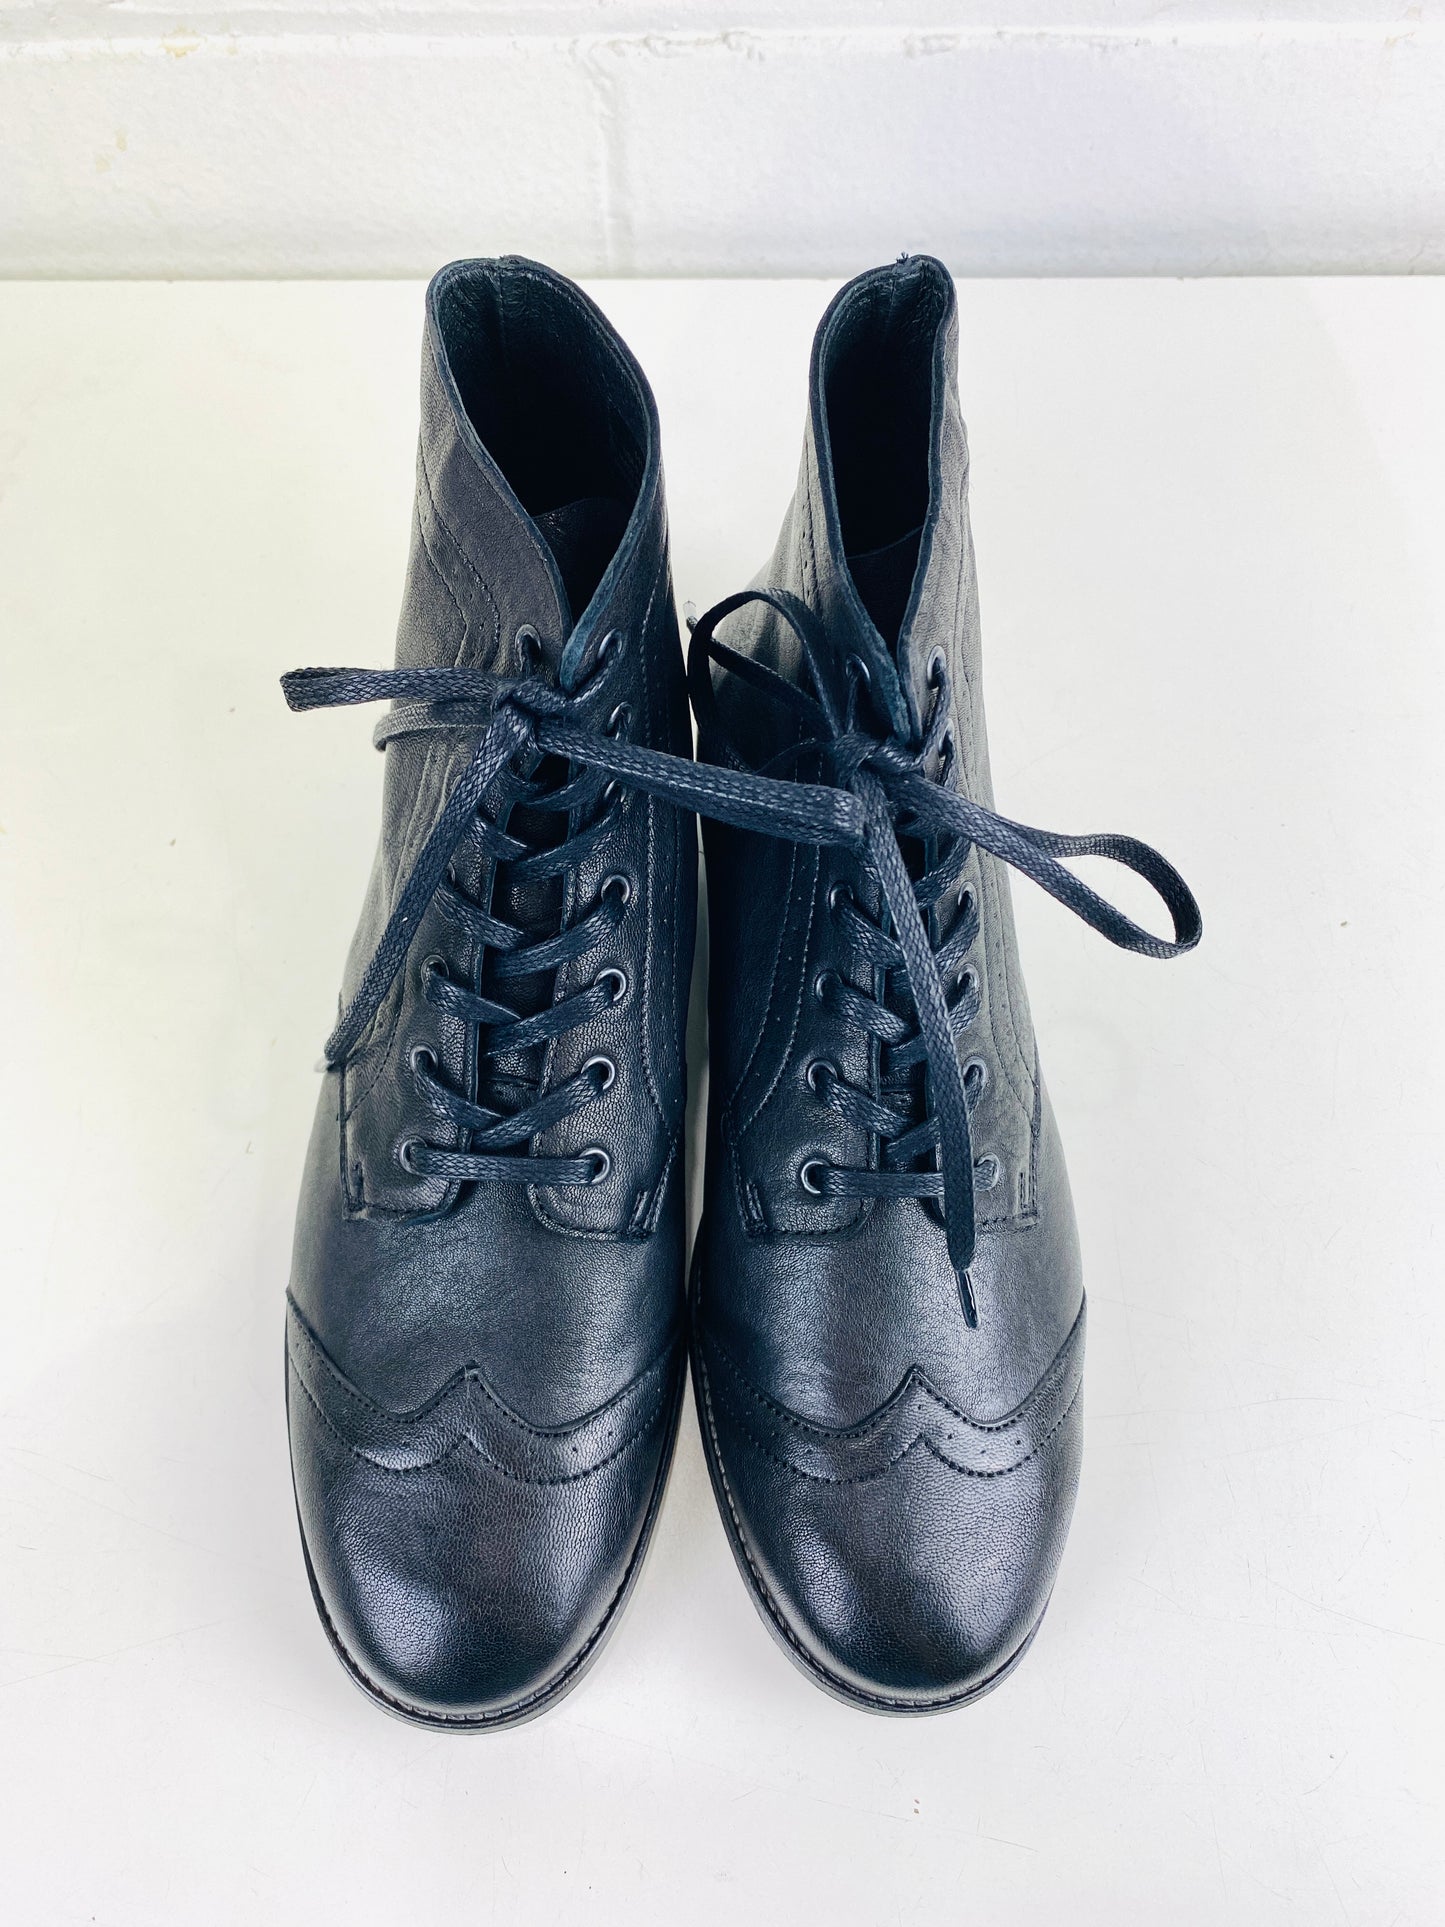 Boys' Period Repro Black Leather Wingtip Brogue Boots, Made in Portugal